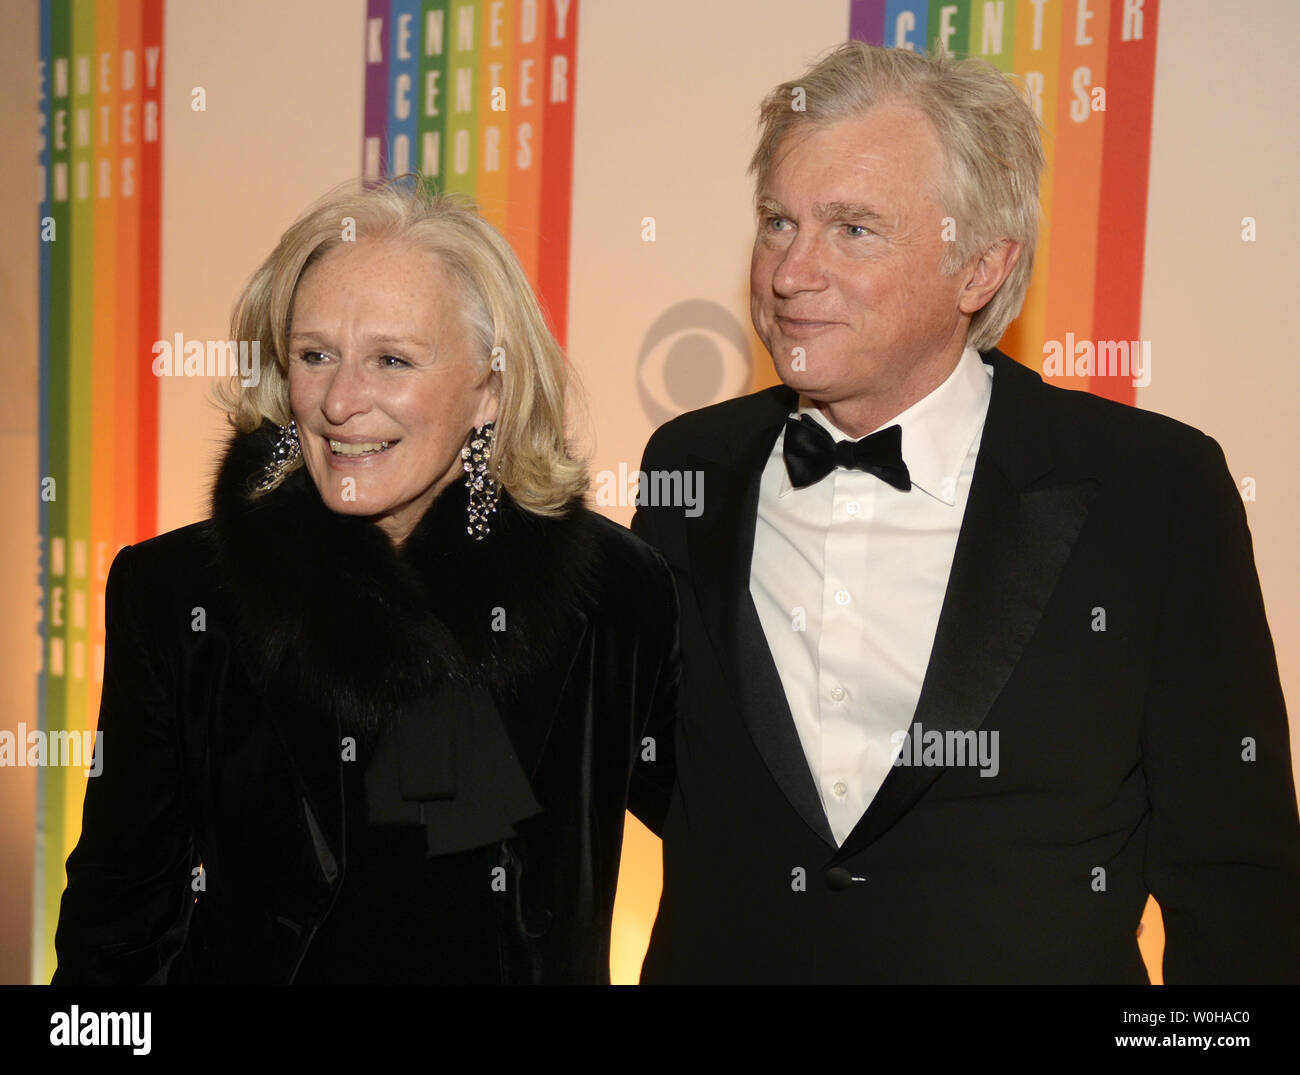 Actress Glenn Close and her escort David Shaw pose for photographers on the red carpet as they arrive for an evening of gala entertainment at the 2013 Kennedy Center Honors, December 8, 2013 in Washington, DC. The Honors are bestowed annually on five artists for their lifetime achievement in the arts and culture.    UPI/Mike Theiler Stock Photo